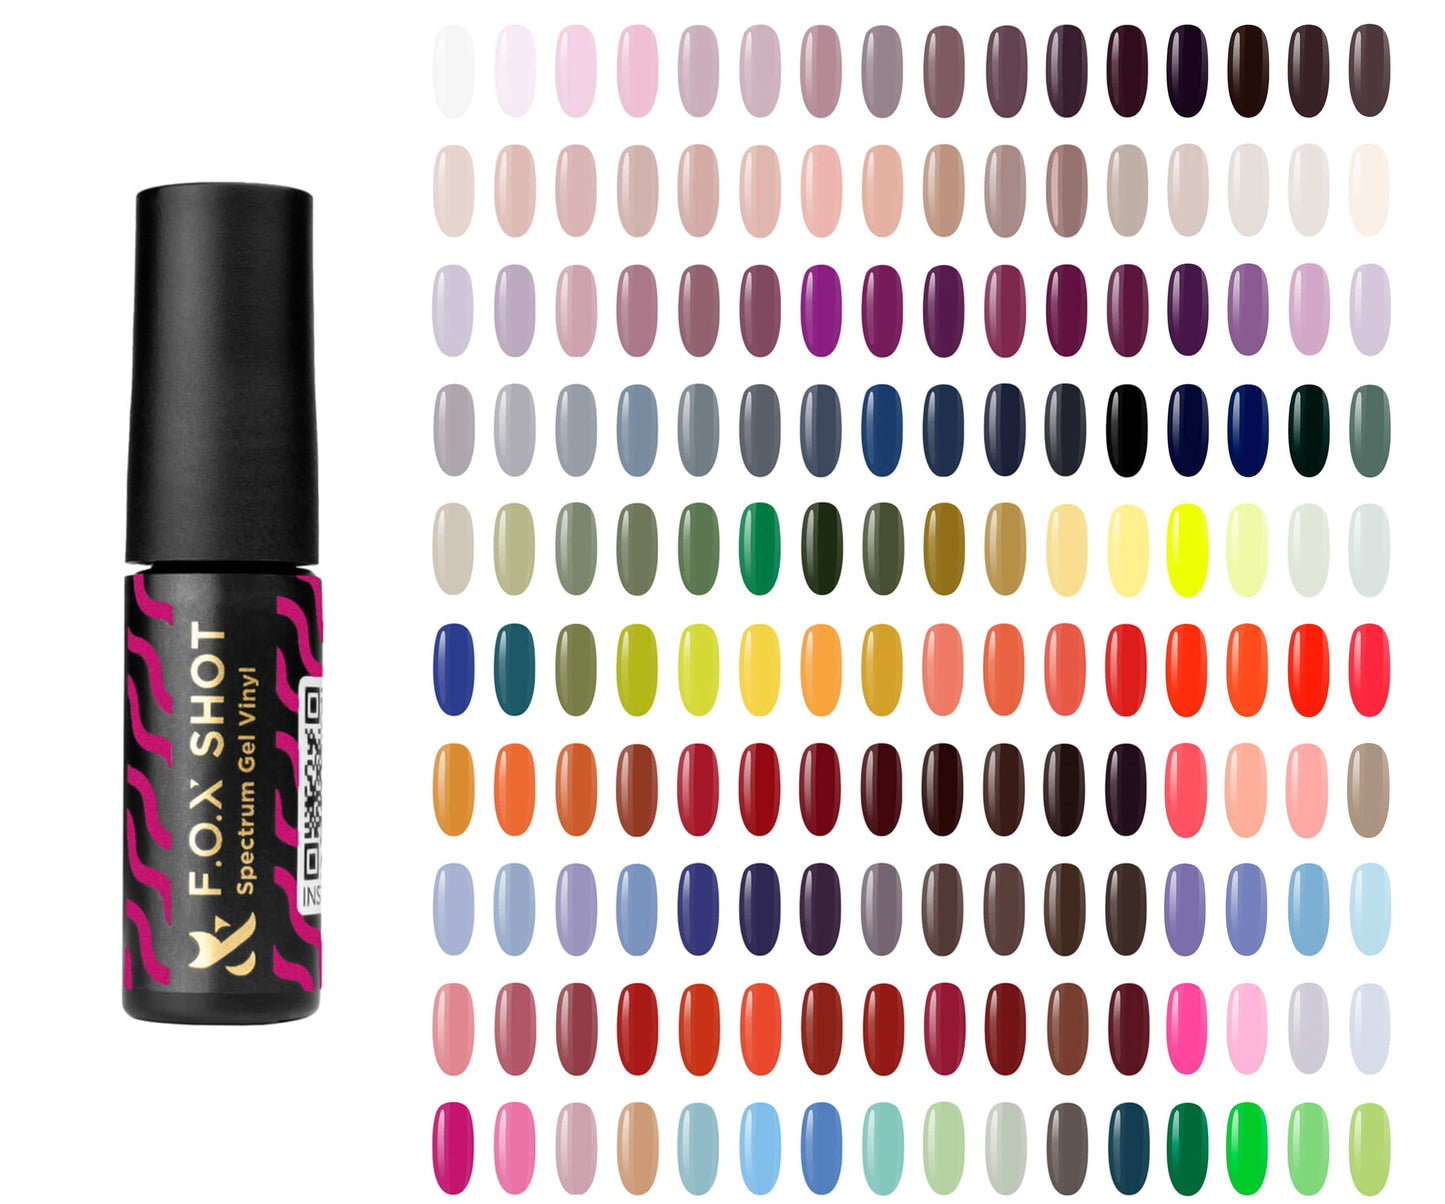 F.O.X Spectrum Full Collection bundle (bulk offer) set + swatches - F.O.X Nails USA